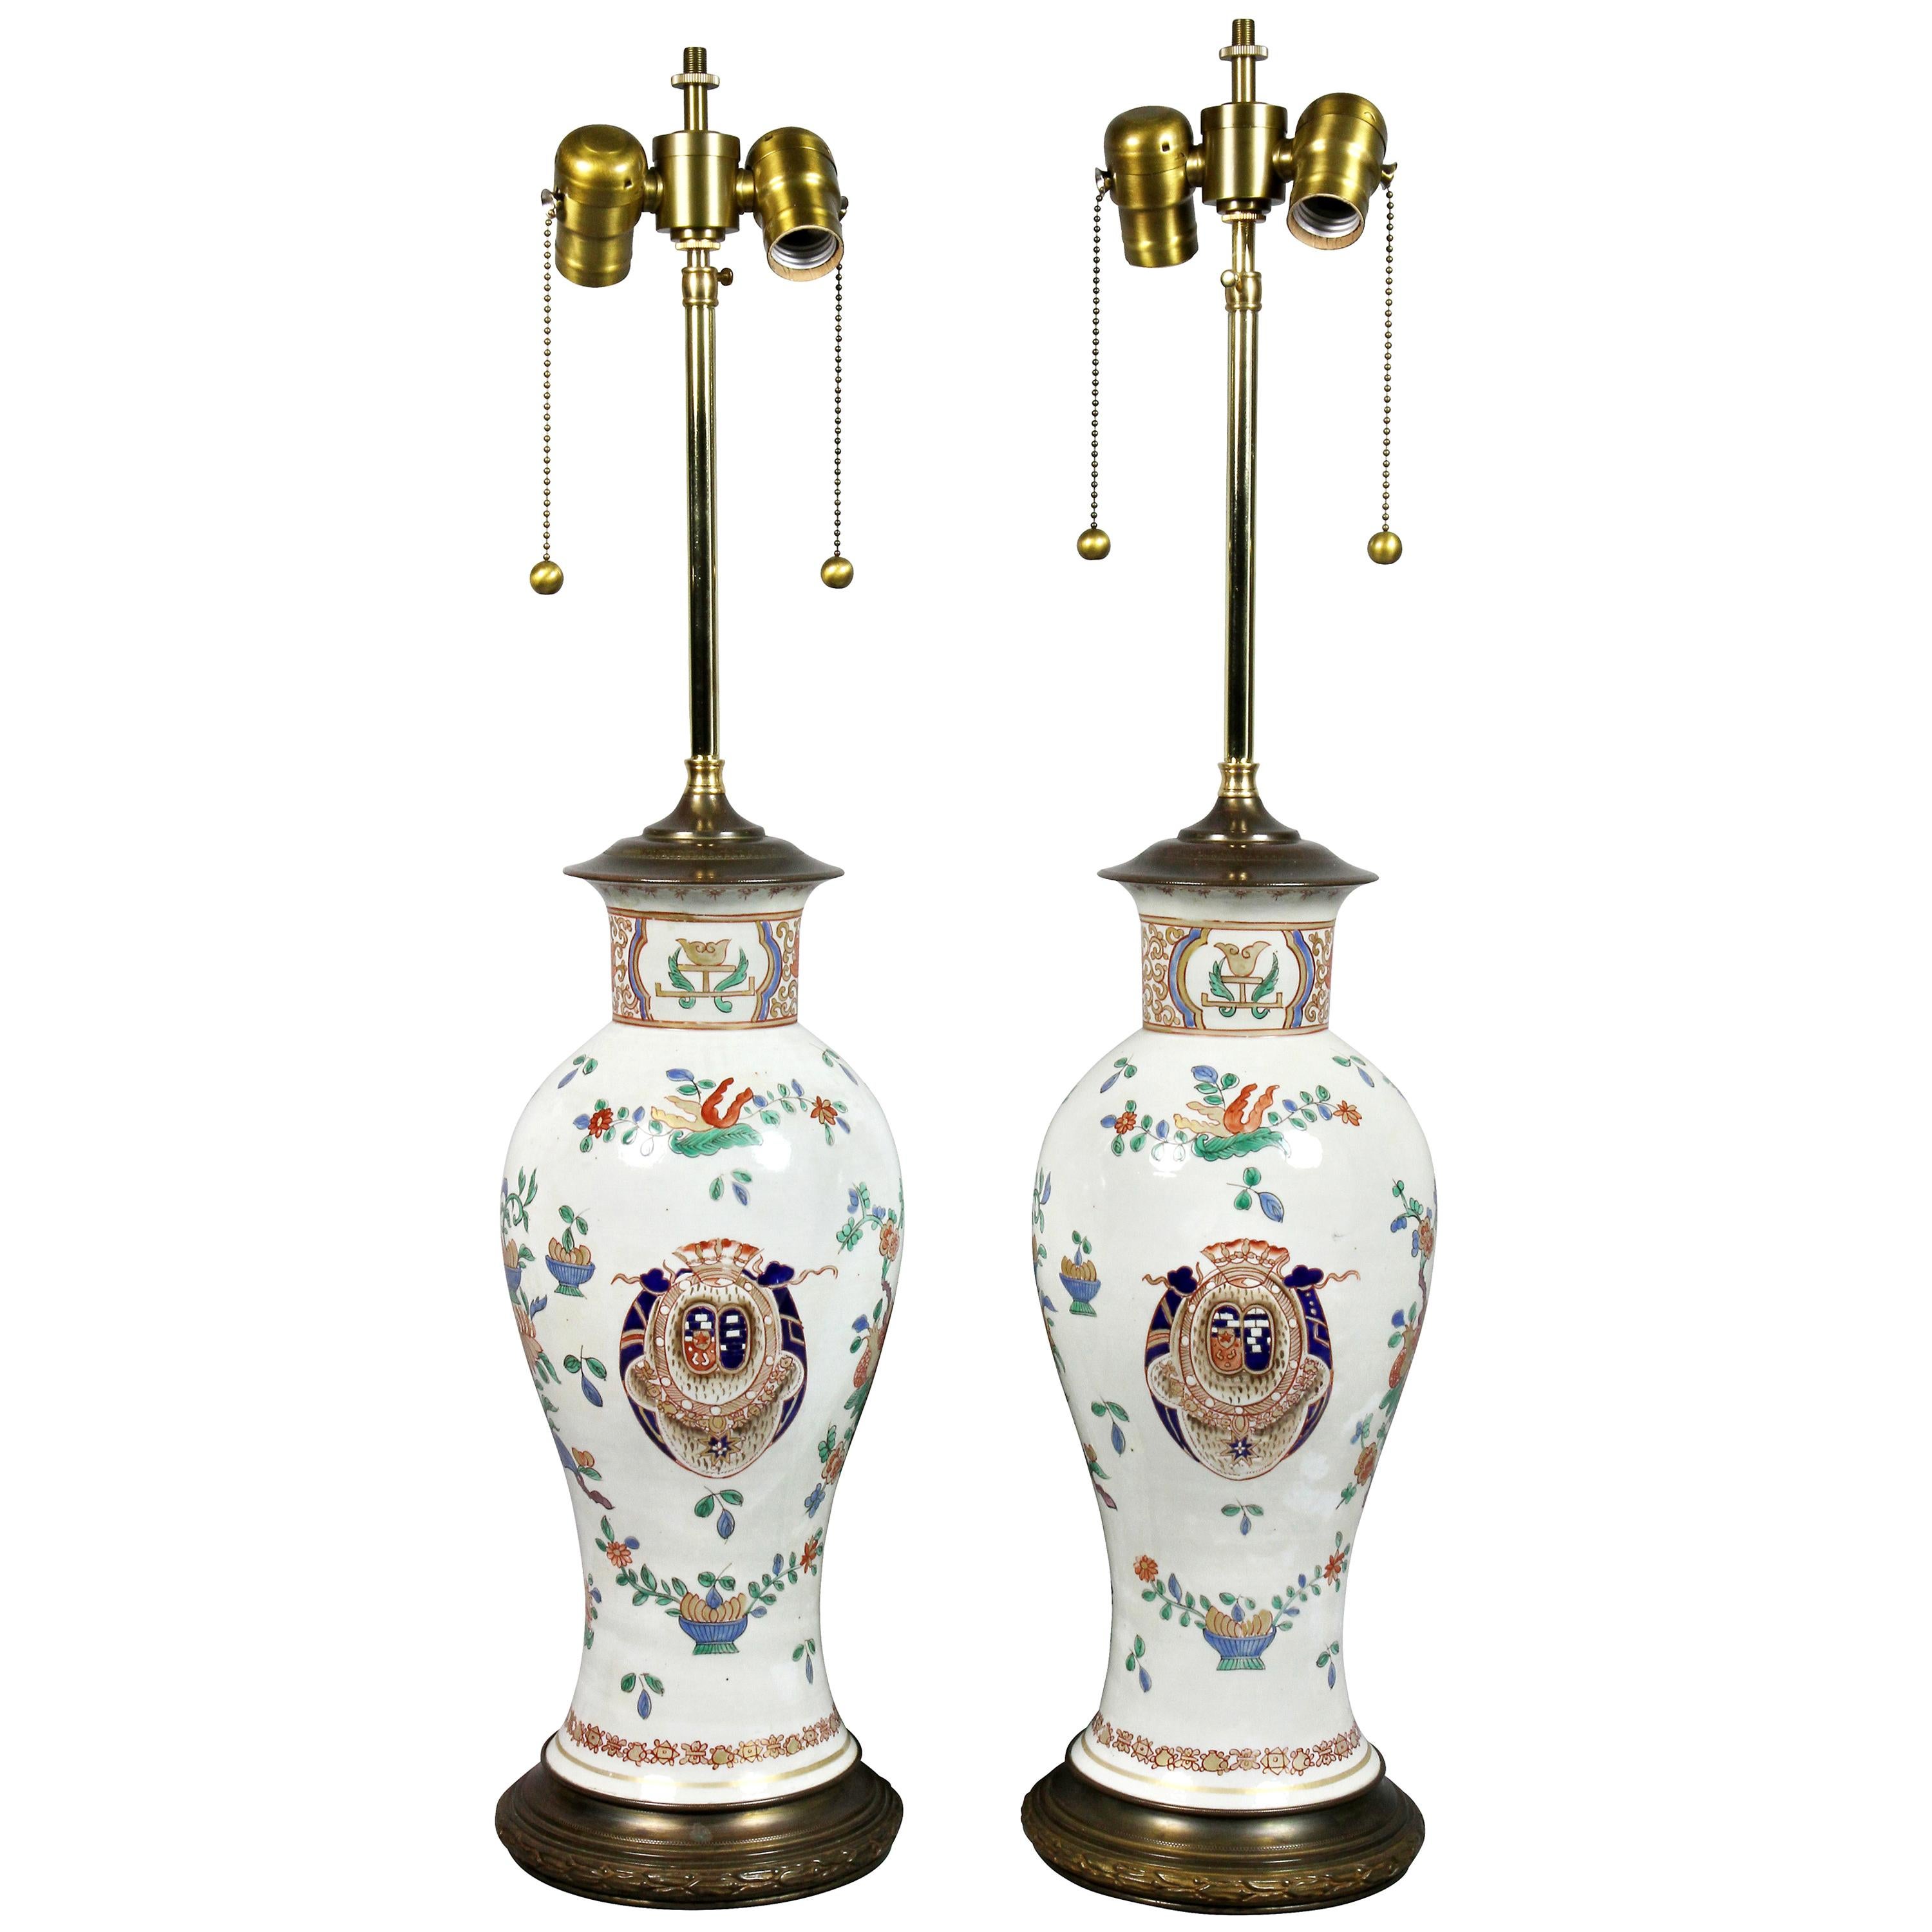 Pair of Samson Chinese Export Style Porcelain Table Lamps